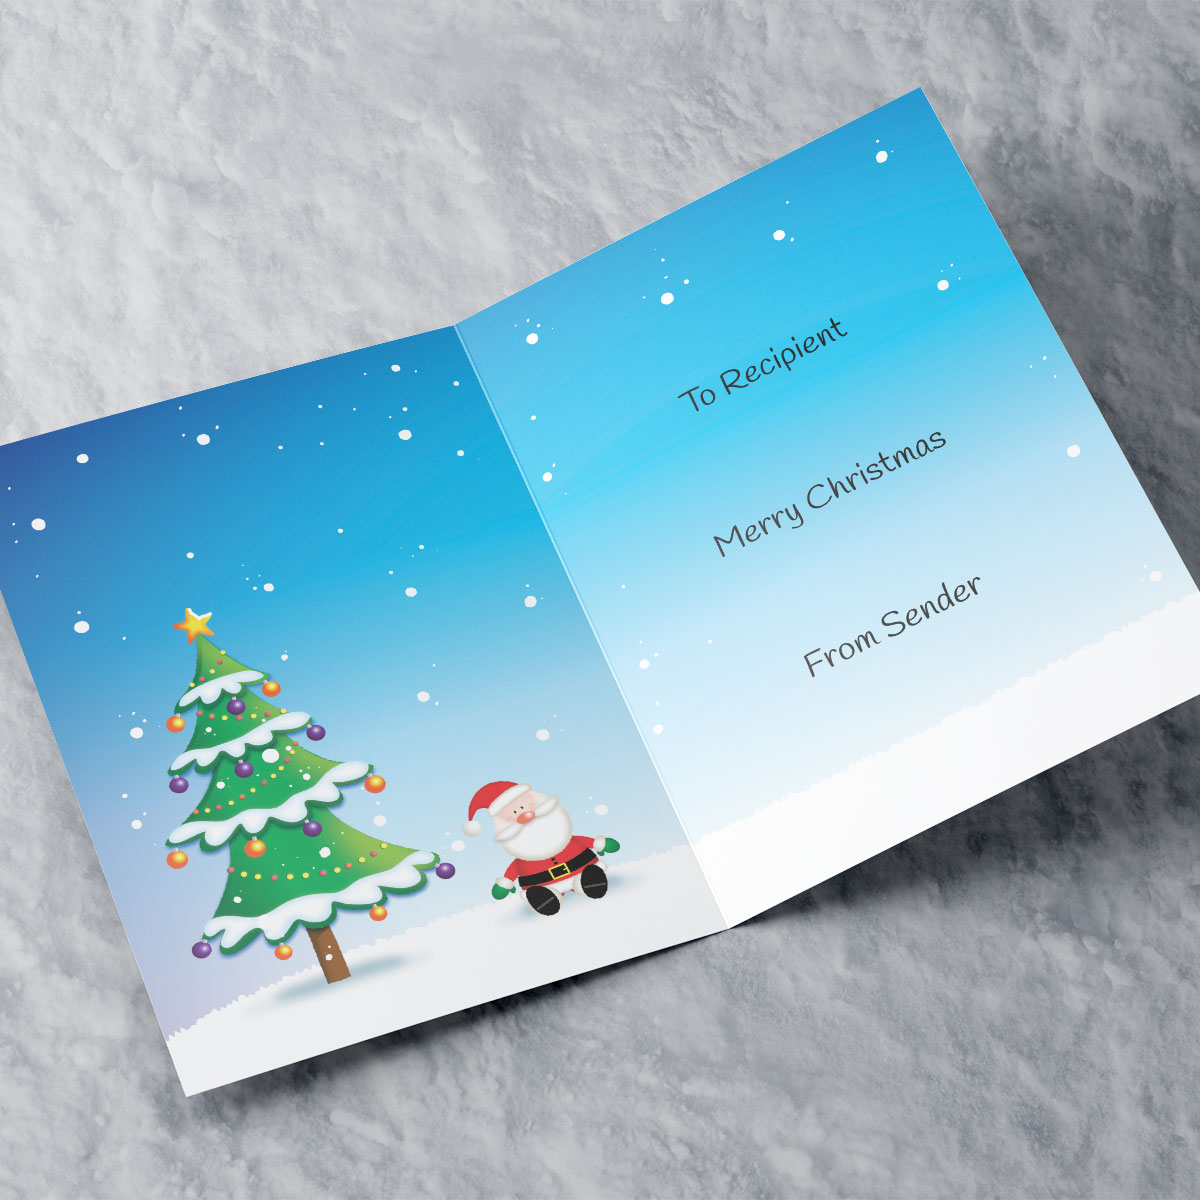 Personalised Christmas Card - Decorating The Tree